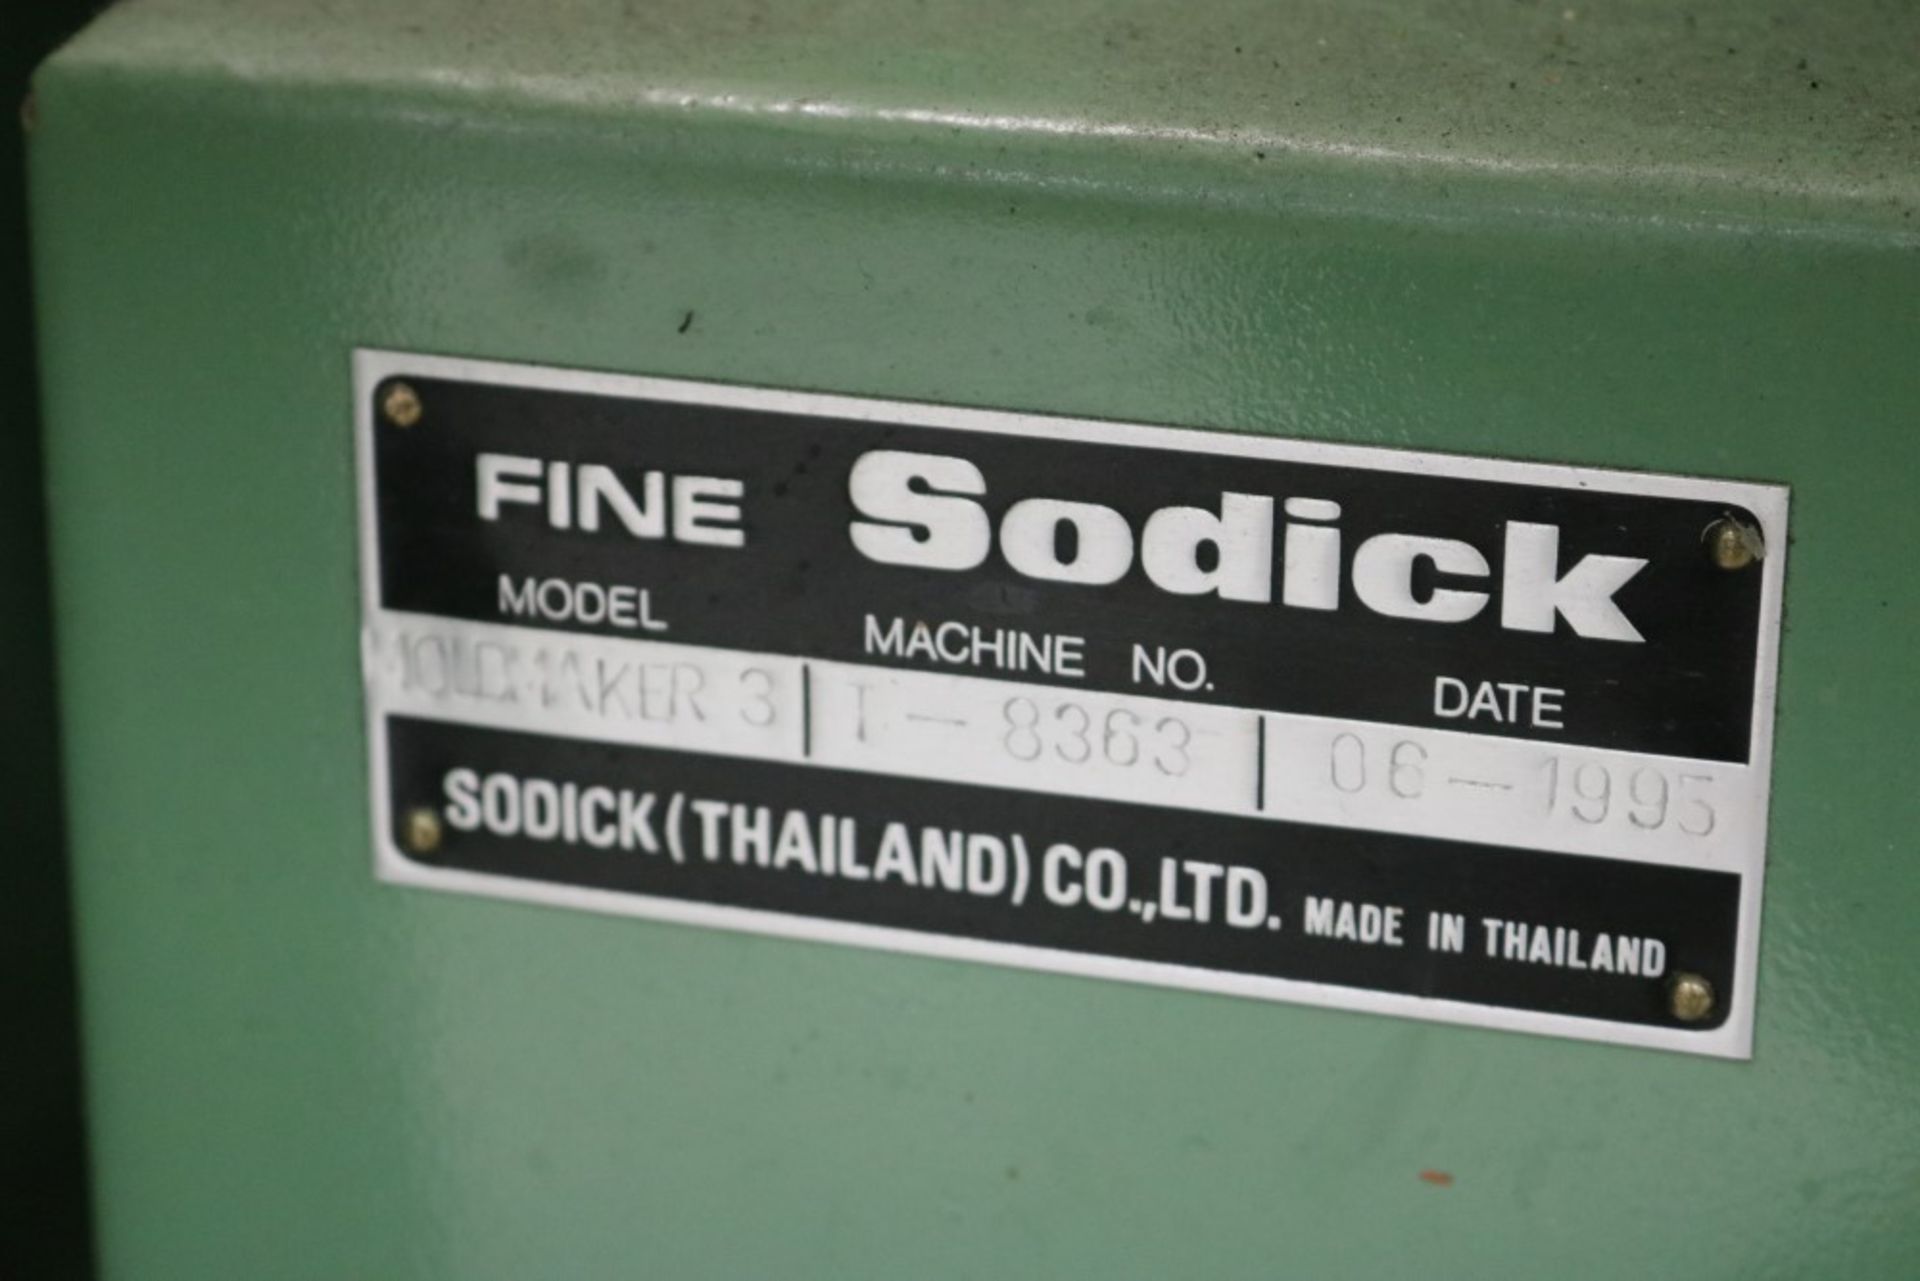 1995 Sodick Sinker EDM w/ 3R Chuck and Fire Supression, Nervo Fuzzy NF40 Control - Image 13 of 14